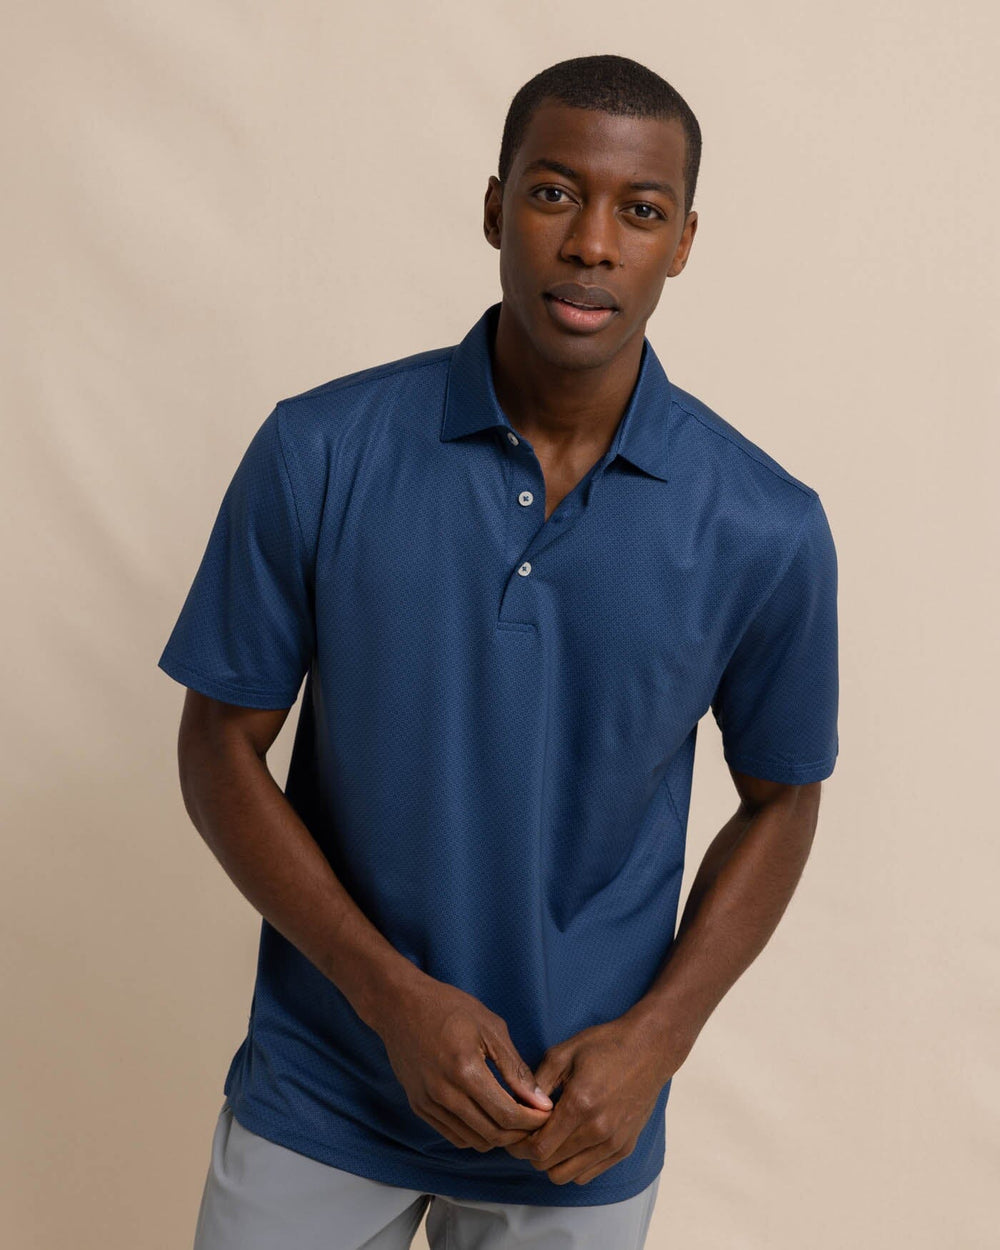 The front view of the Southern Tide Driver Coastal Geo Polo Shirt by Southern Tide - Dress Blue